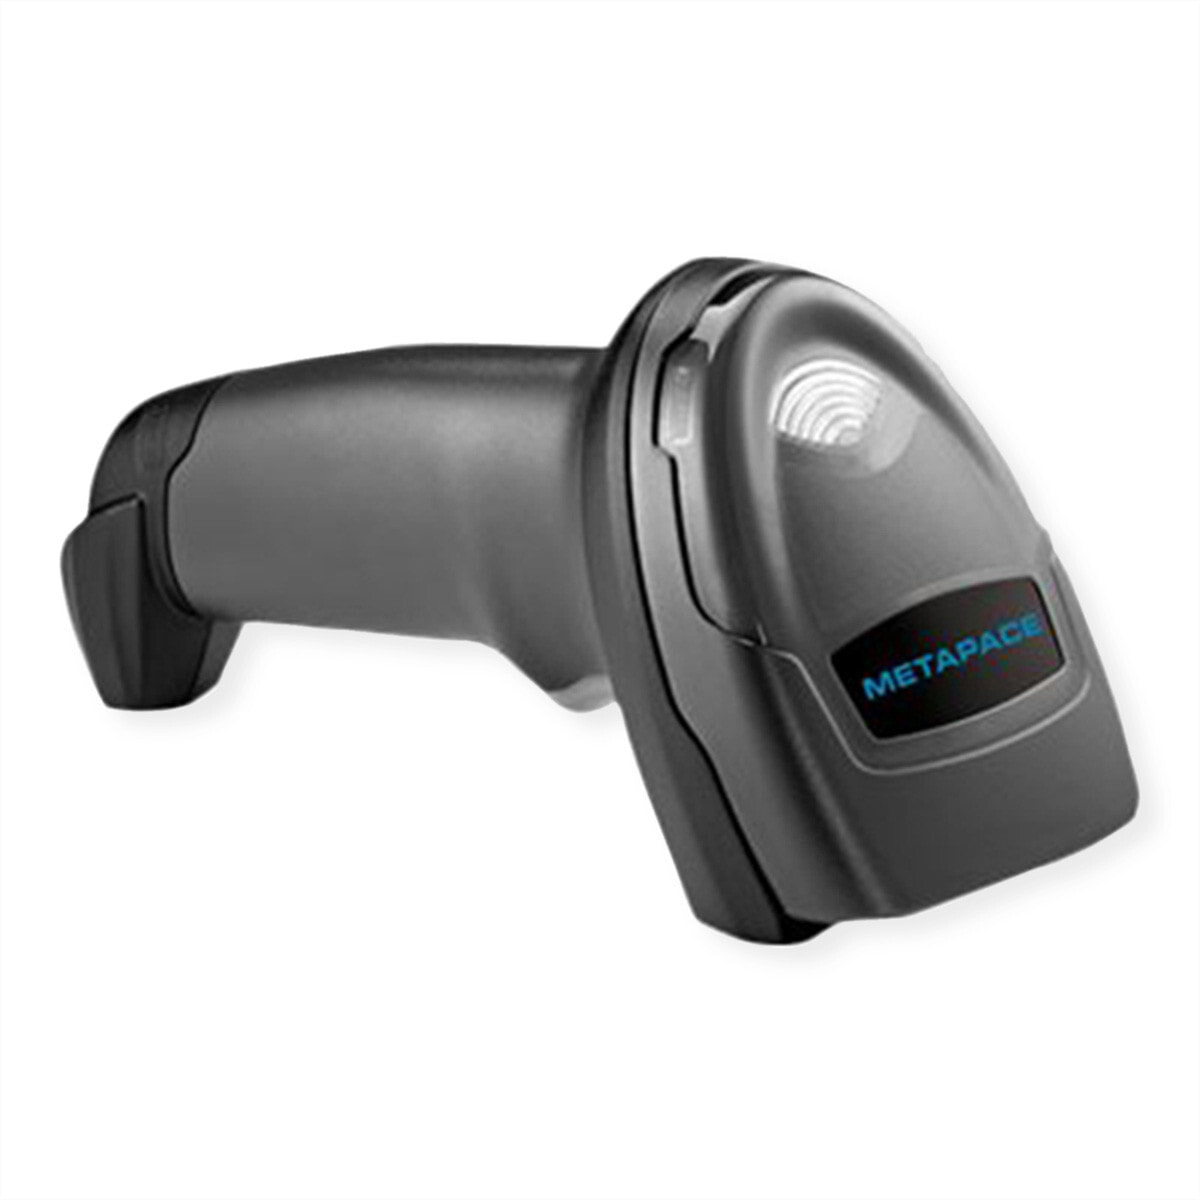 MP-28 Barcode scanner Cablato 1D 2D Imager Antracite Scanner portatile - Barcode scanner - RS-232